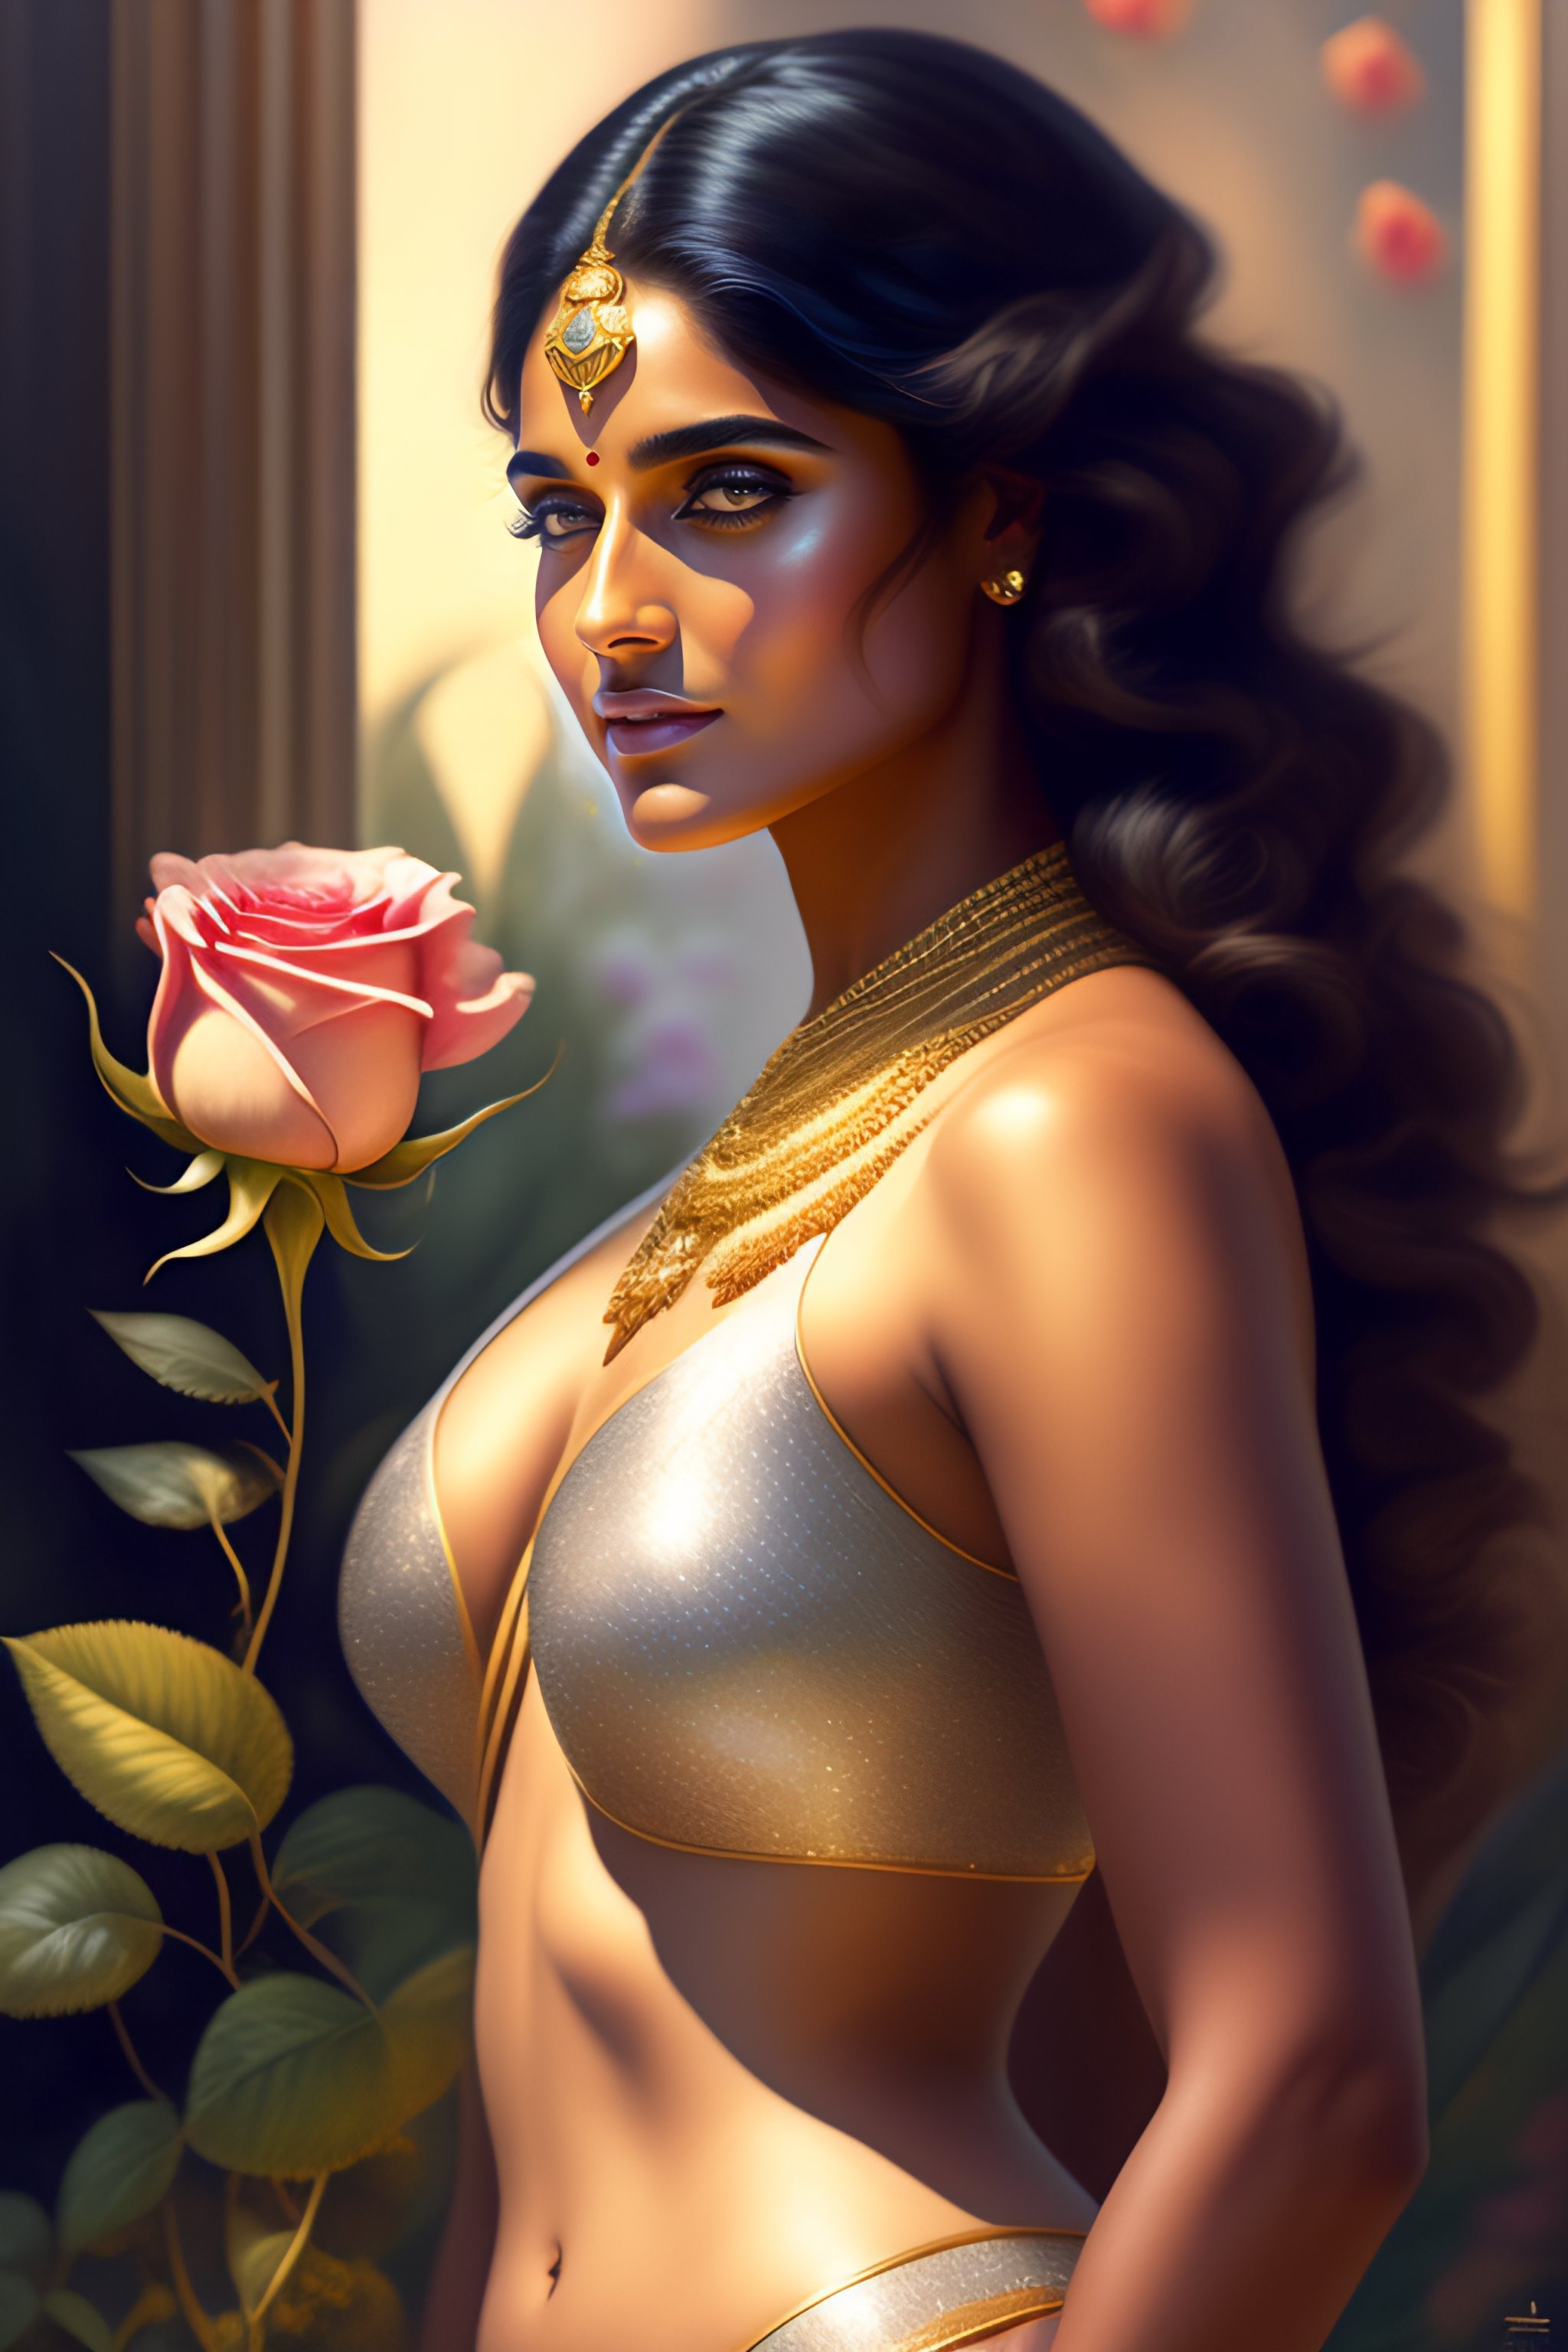 Lexica - Spanish woman niveda thomas, smelling a flower, roses everywhere, highly  detailed, silver bra with golden line design, large bra, with golde